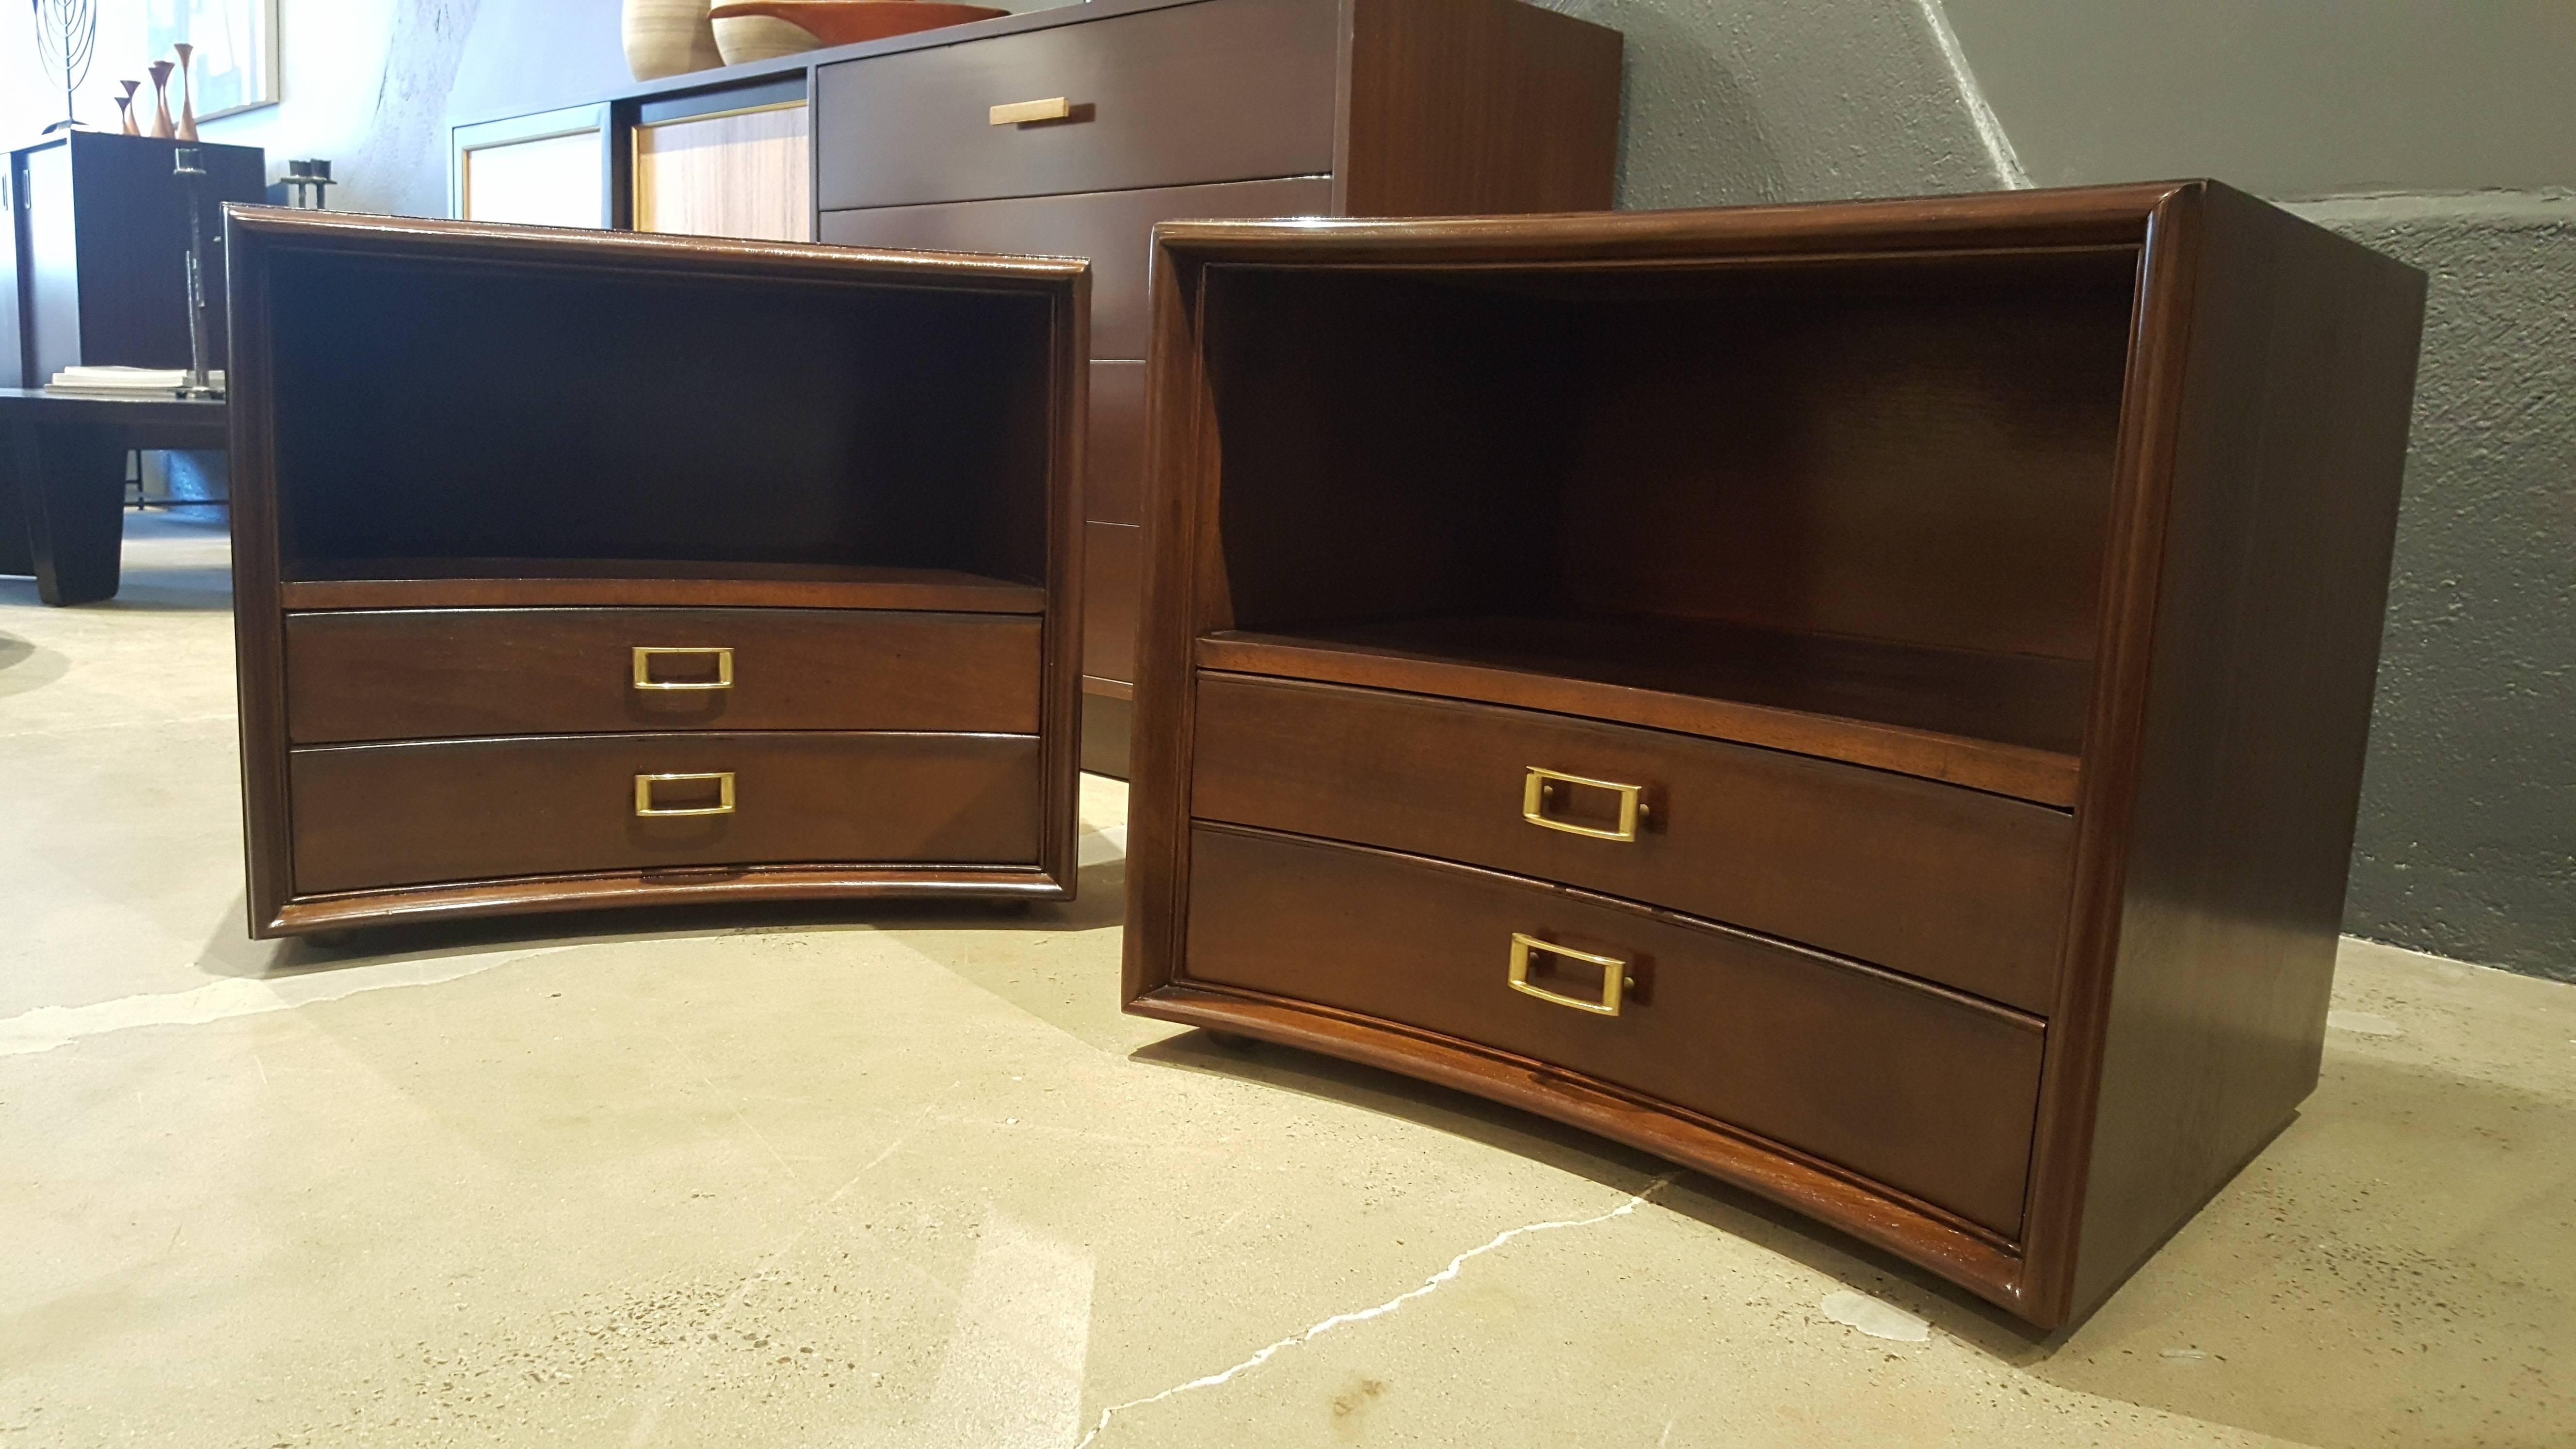 Handsome, classic pair of nightstands by Paul Frankl for Johnson Furniture, late 1950s-early 1960s. Curved fronts and sculptural hardware with great storage. These appear to float, as they sit on small bun feet. Scaled nicely for vintage or current